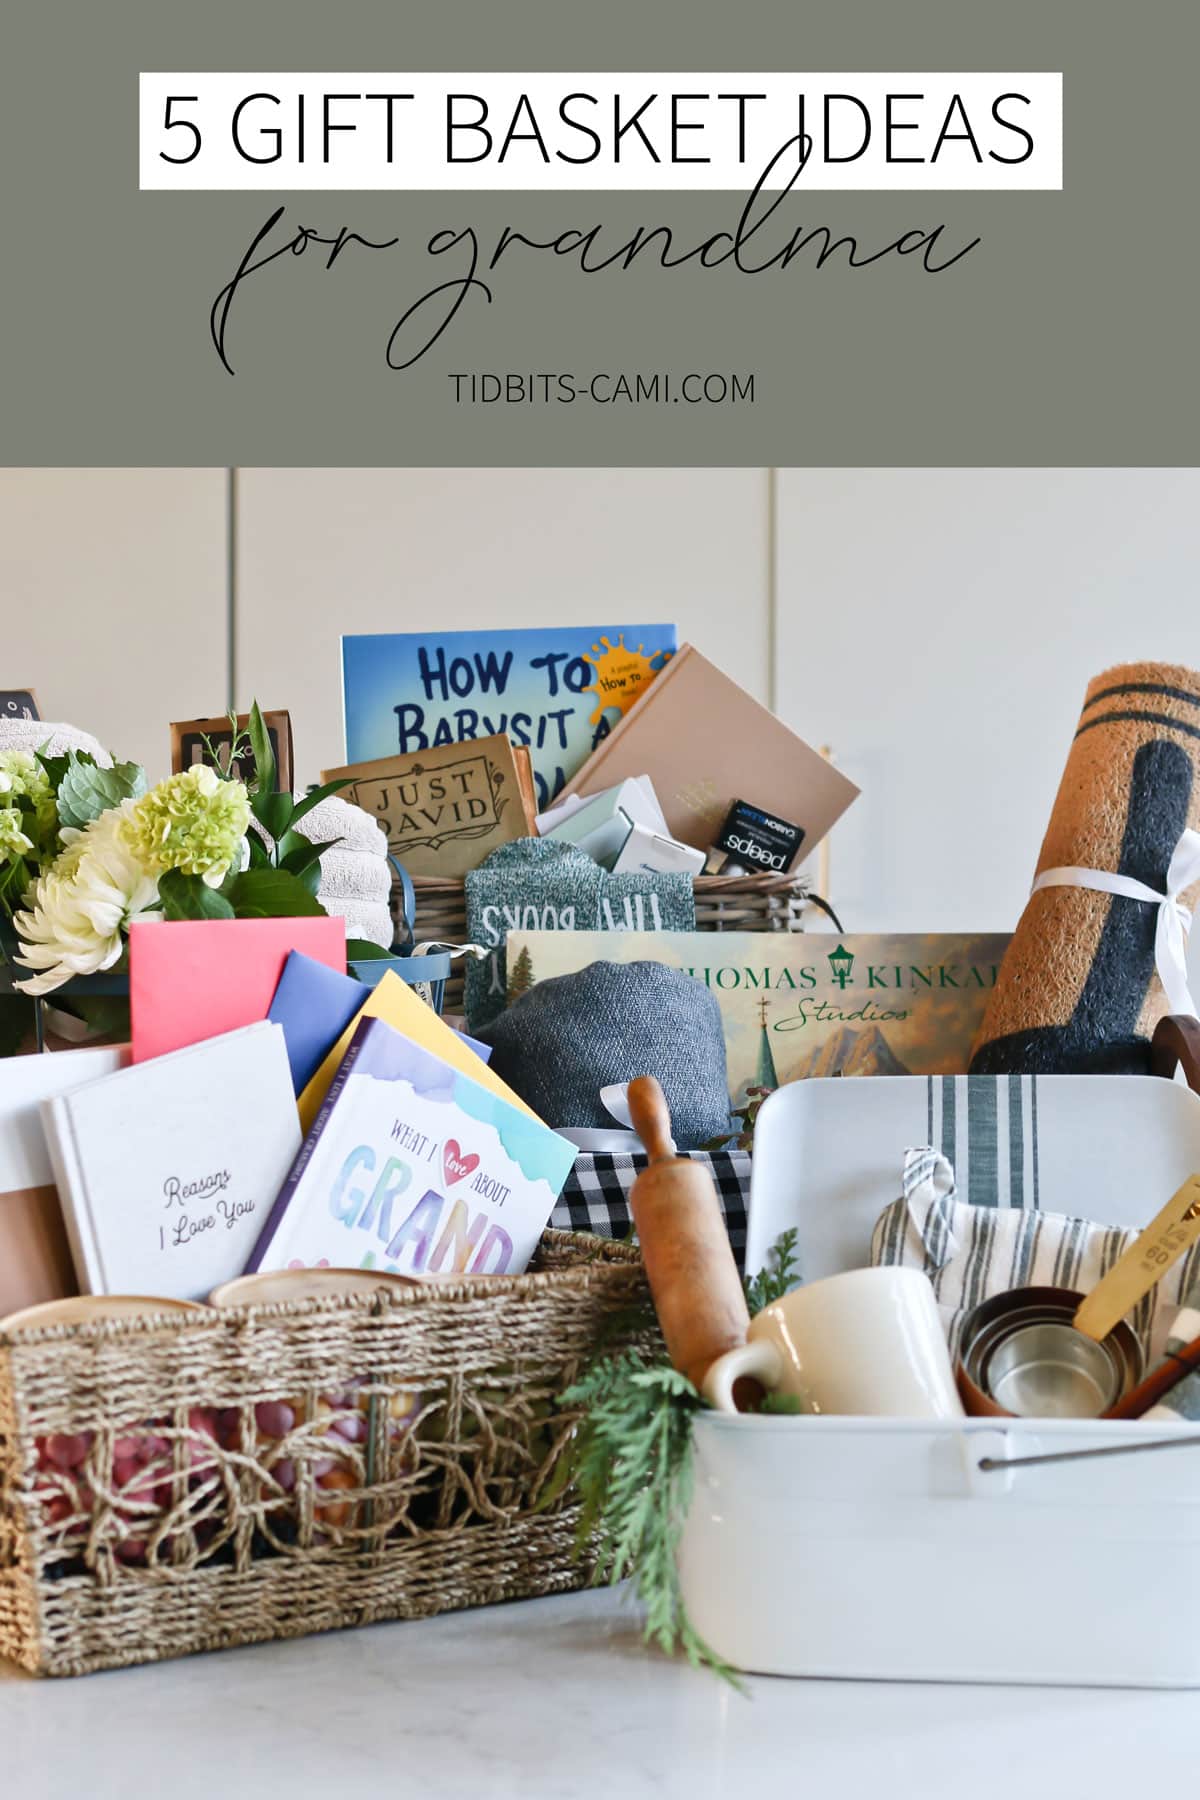 12 DIY Gift Basket Ideas for Mother's Day that Mom Will Love!